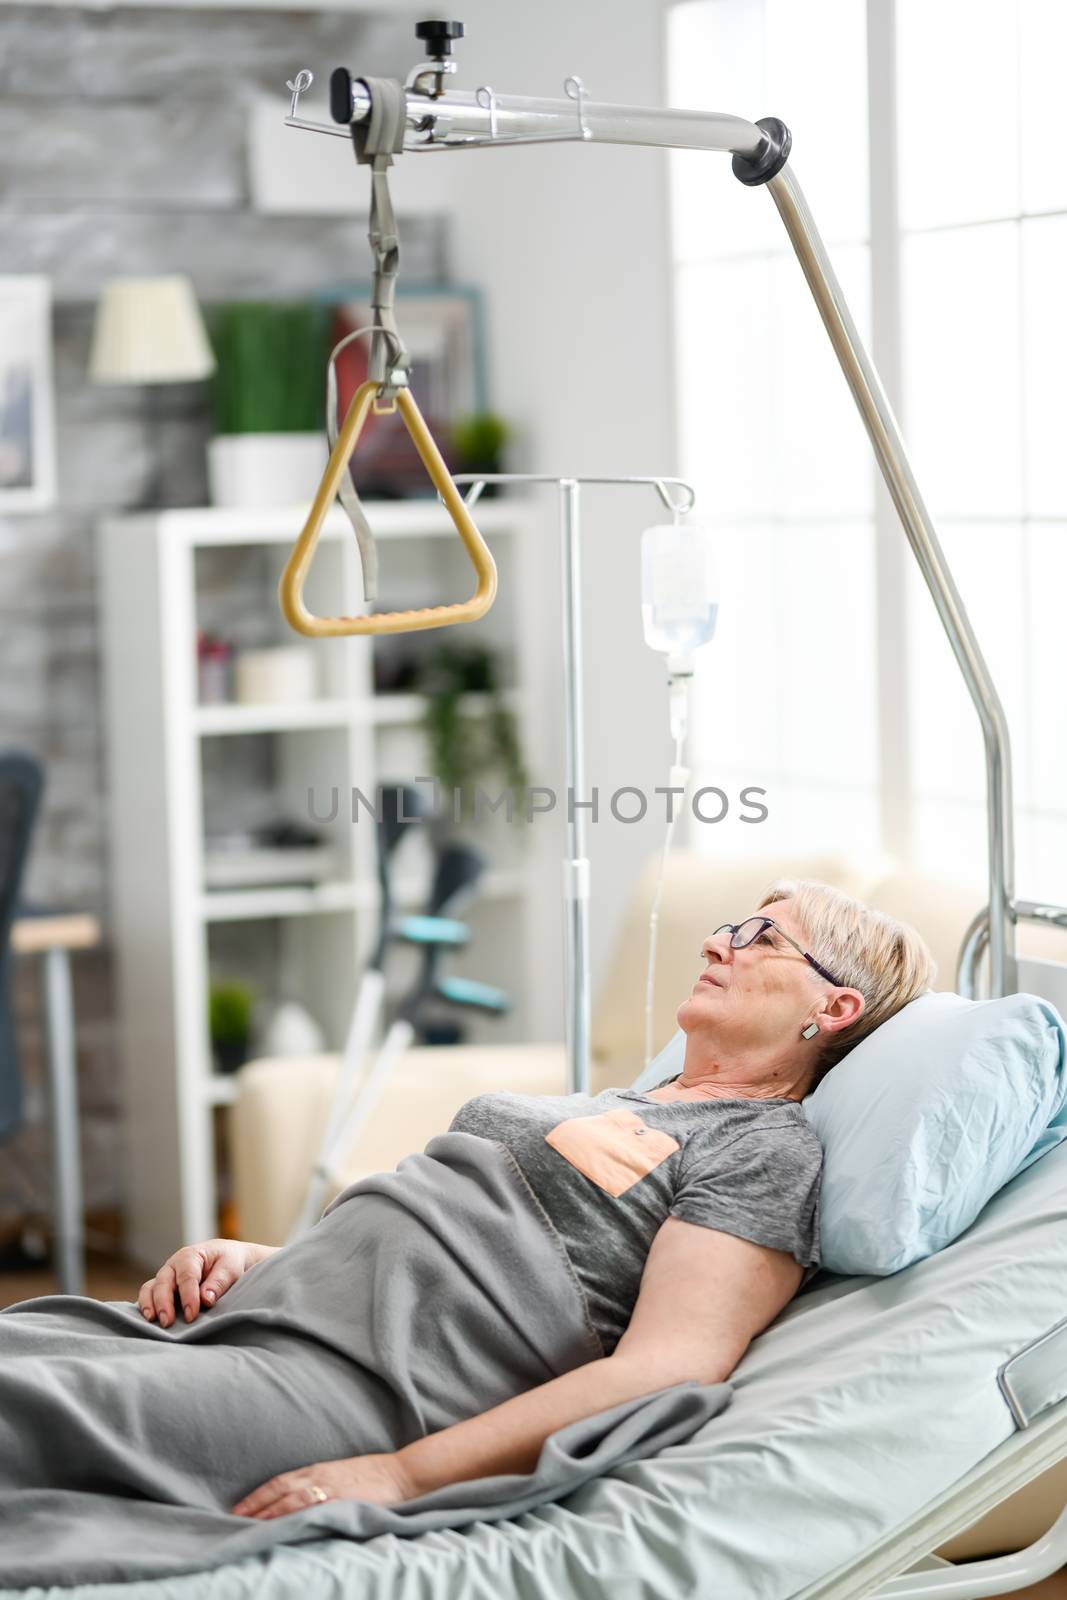 Retired old woman lying peacefully in a nursing home bed. Aged granny in nursing home.